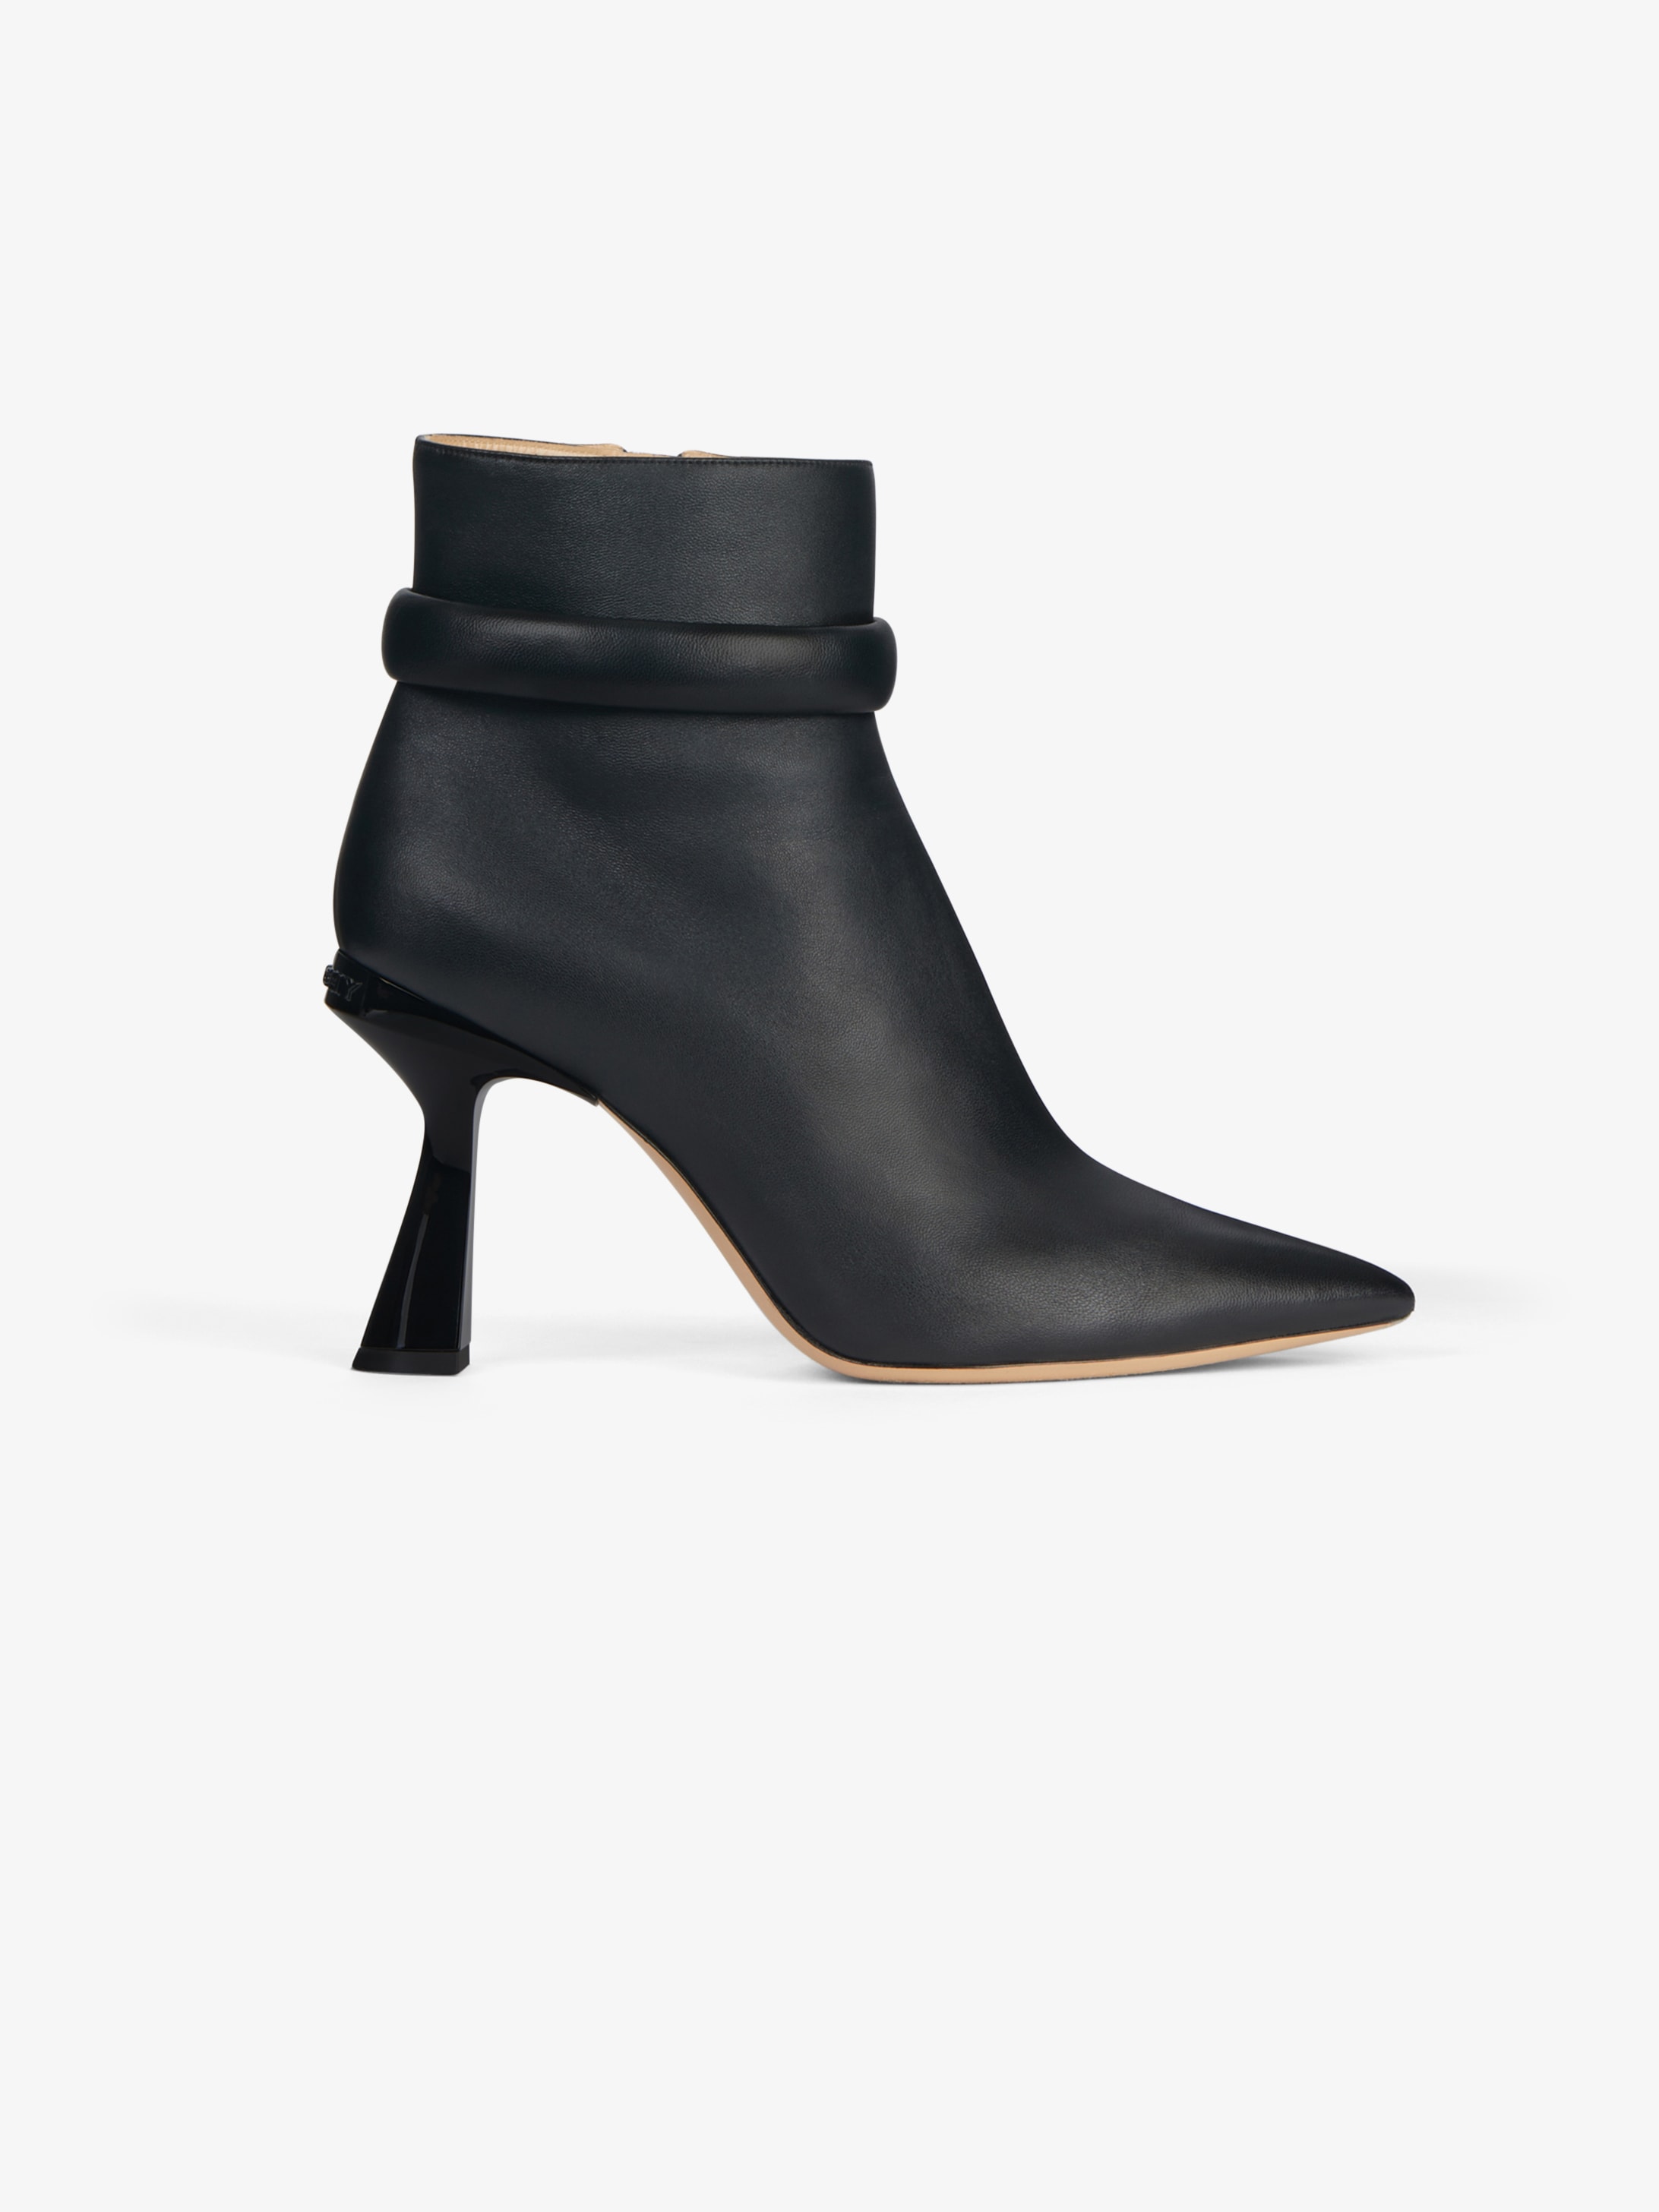 givenchy zipper boots